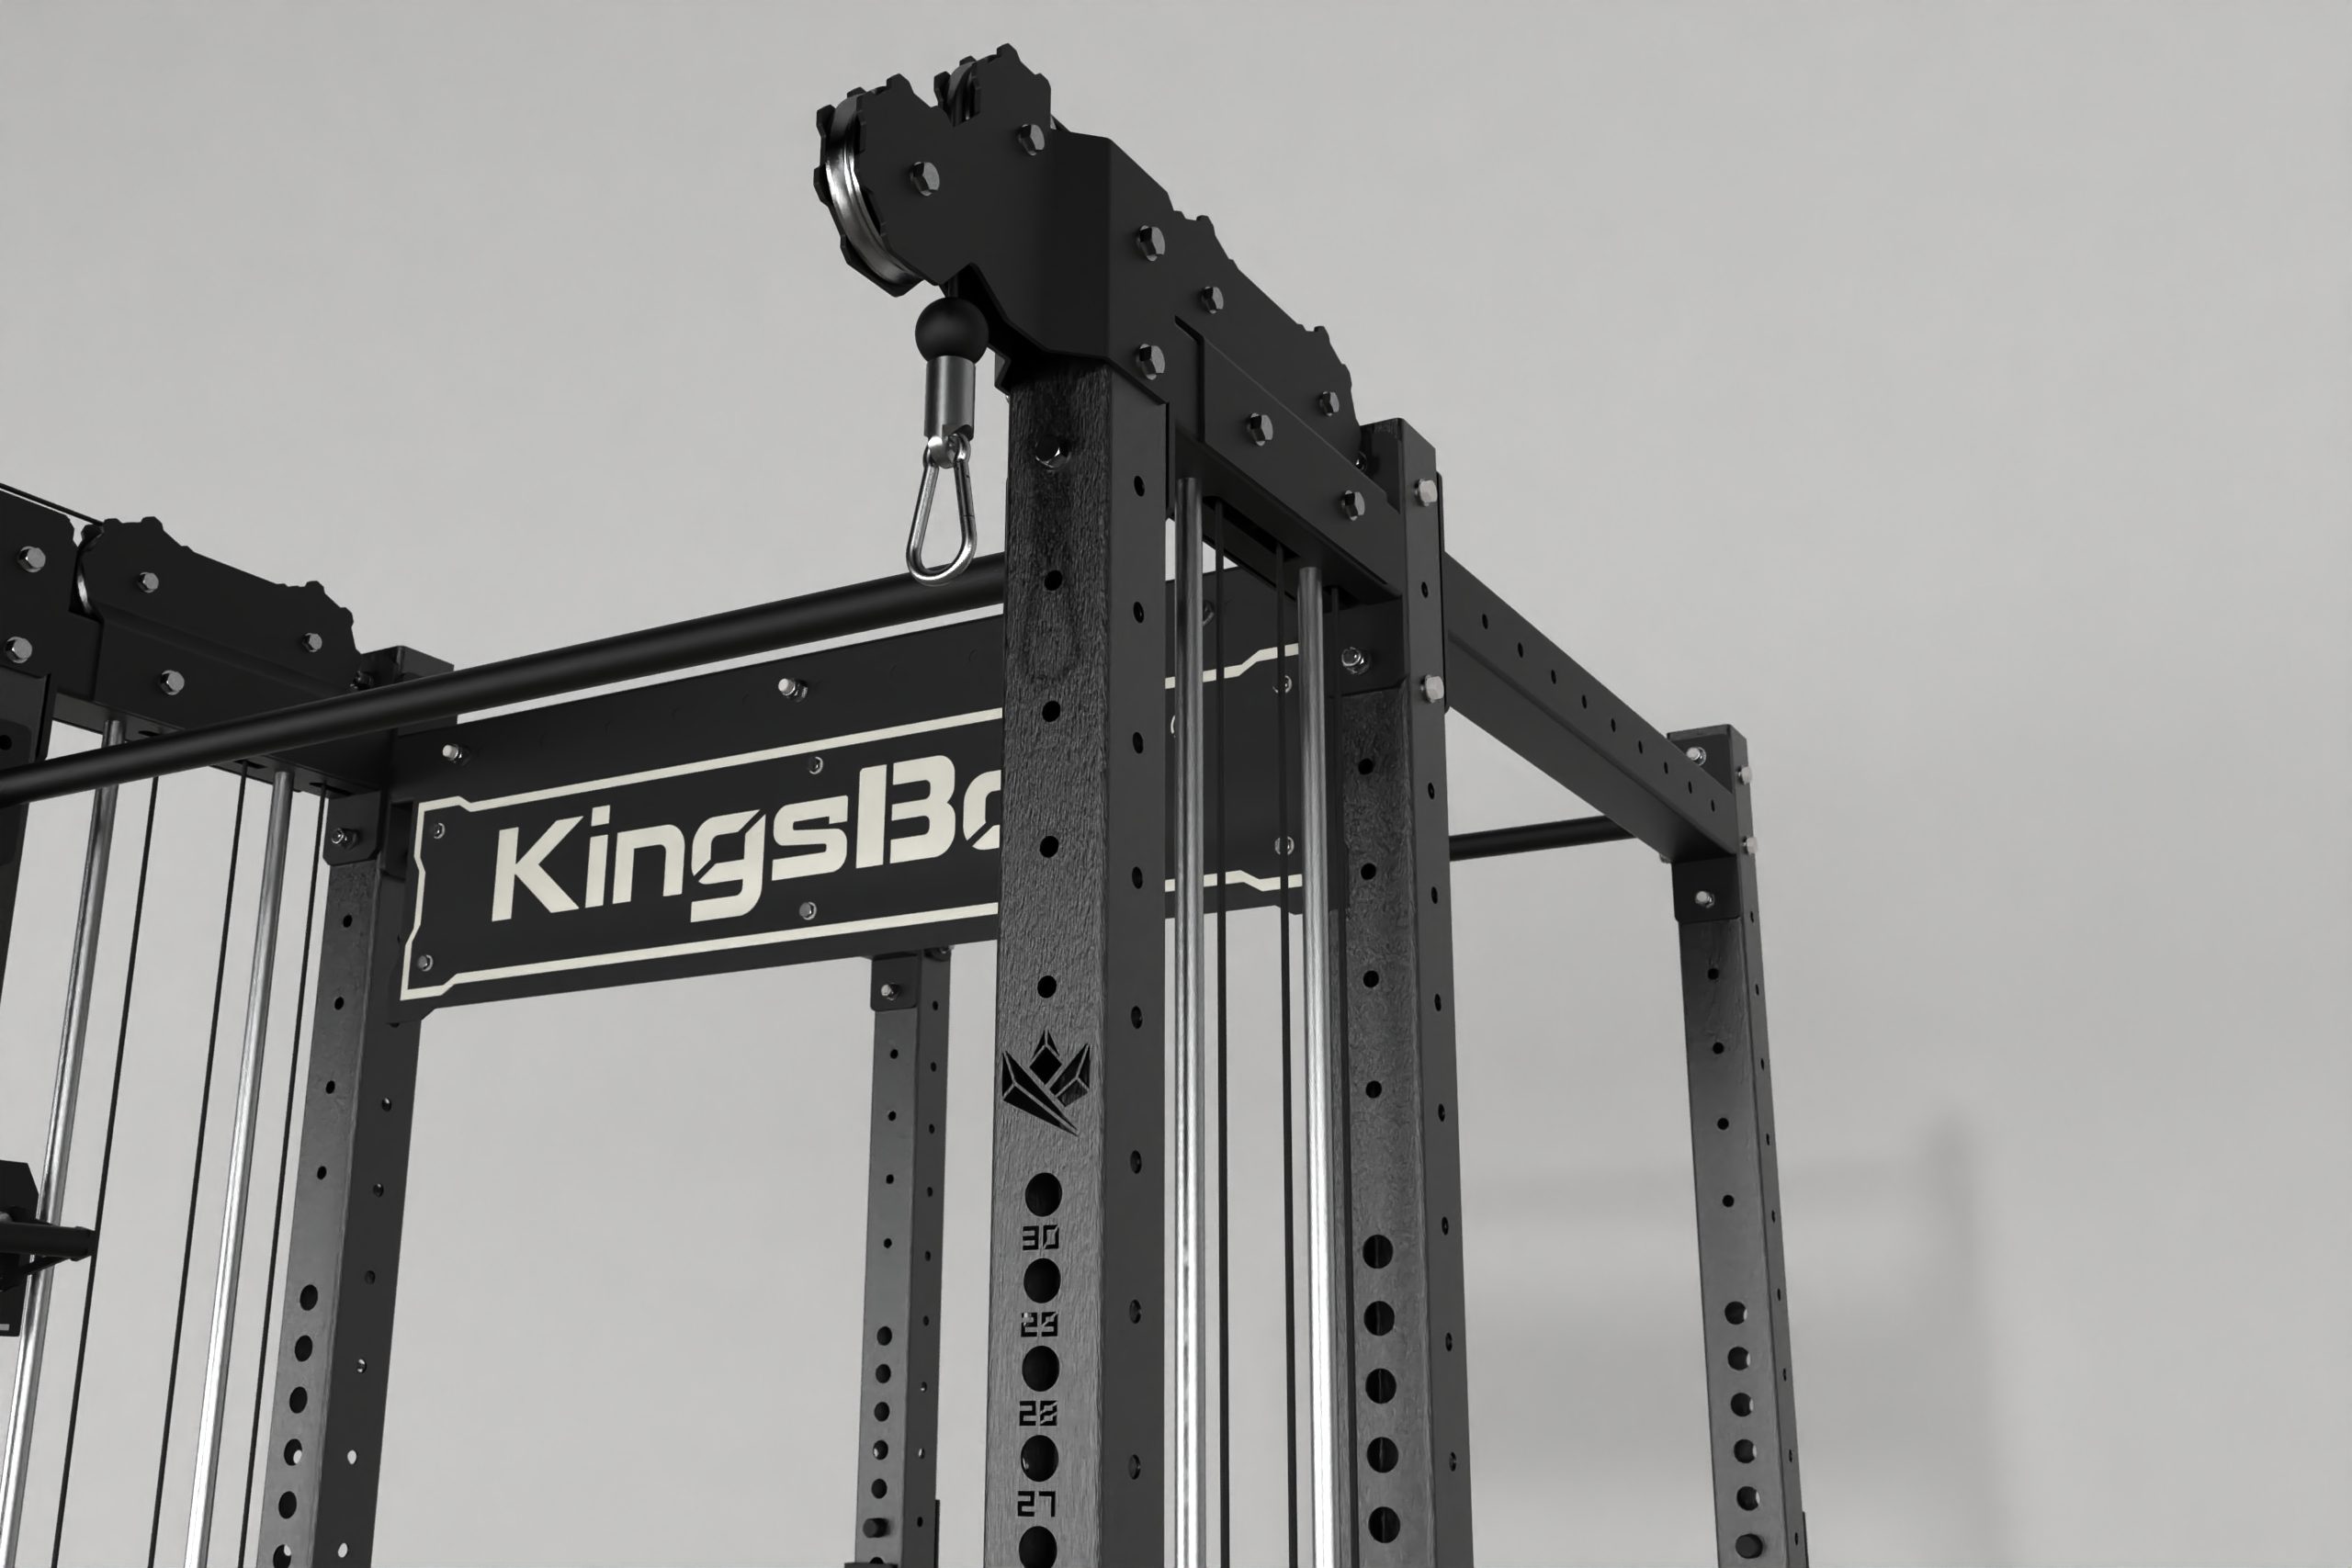 Mighty Pulley Power Rack CX-37 | KingsBox